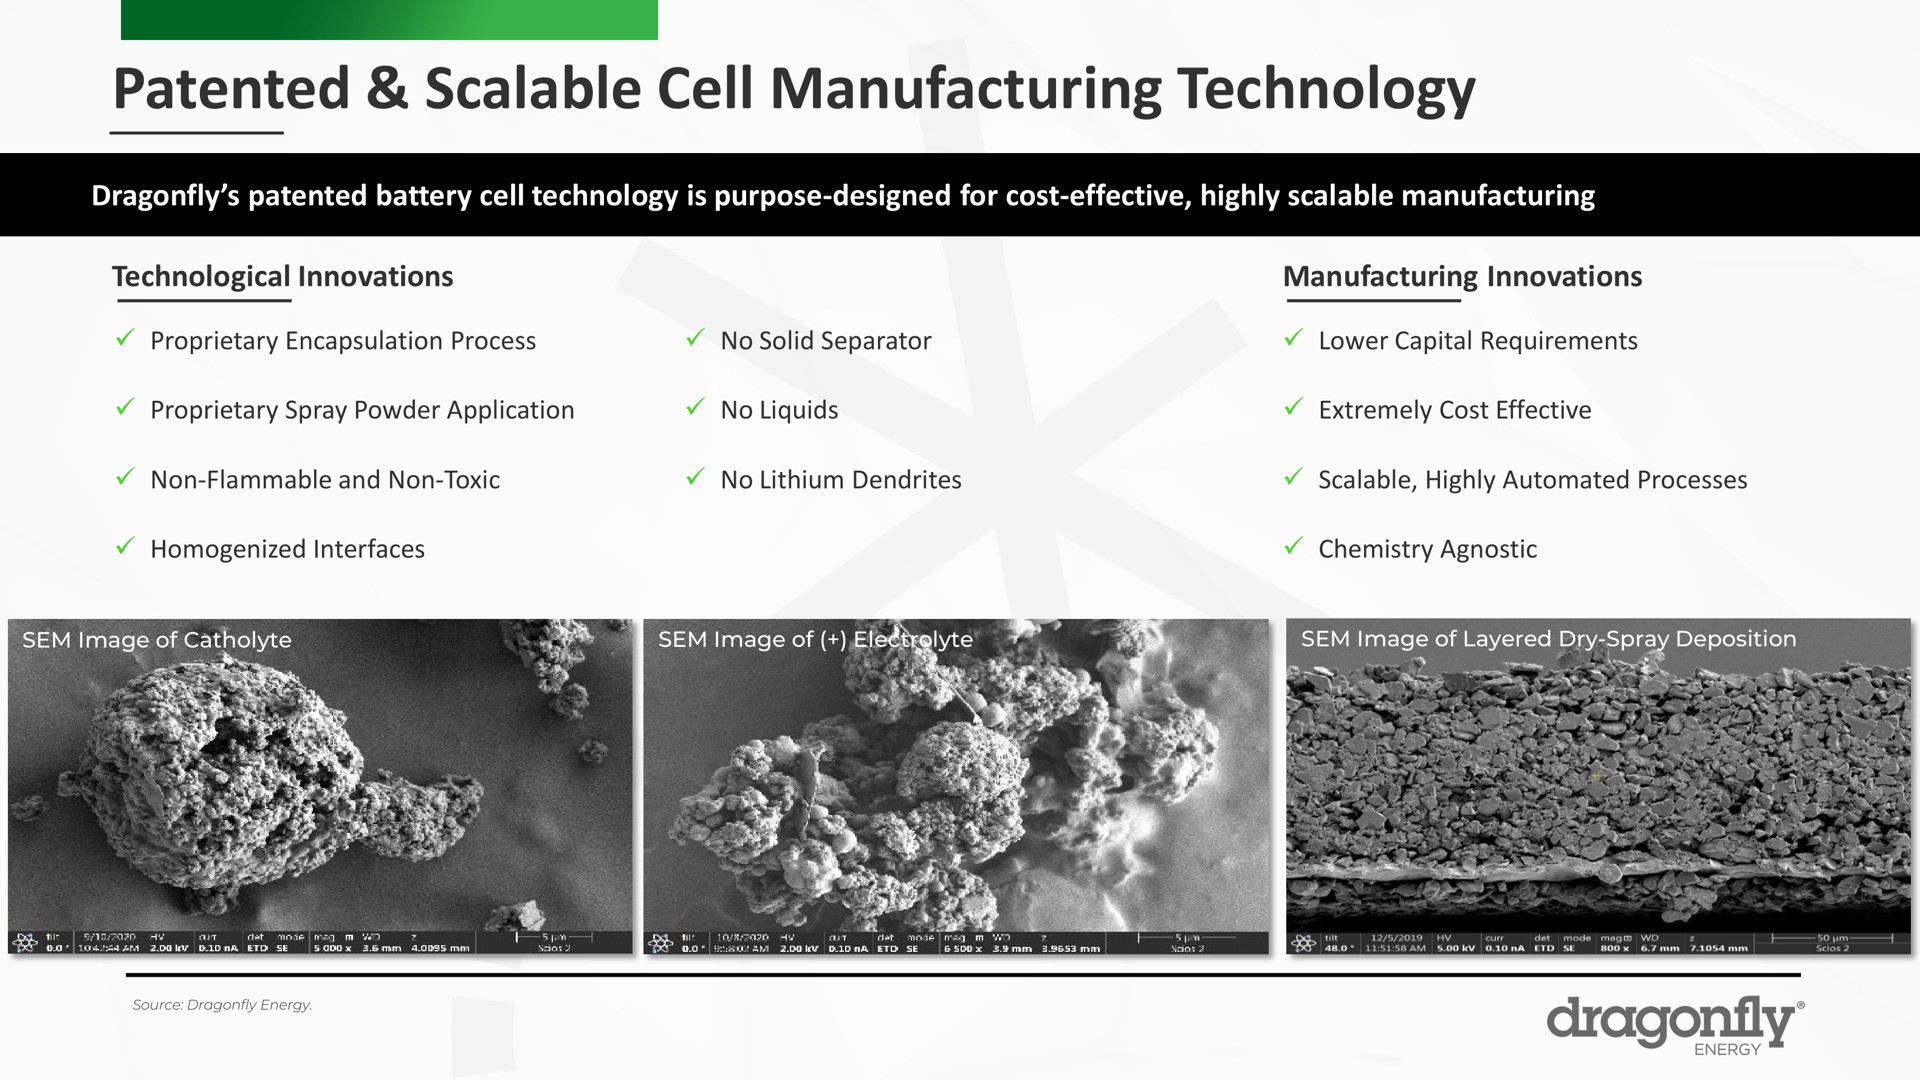 patented scalable cell manufacturing technology dragonfly | Dragonfly Energy